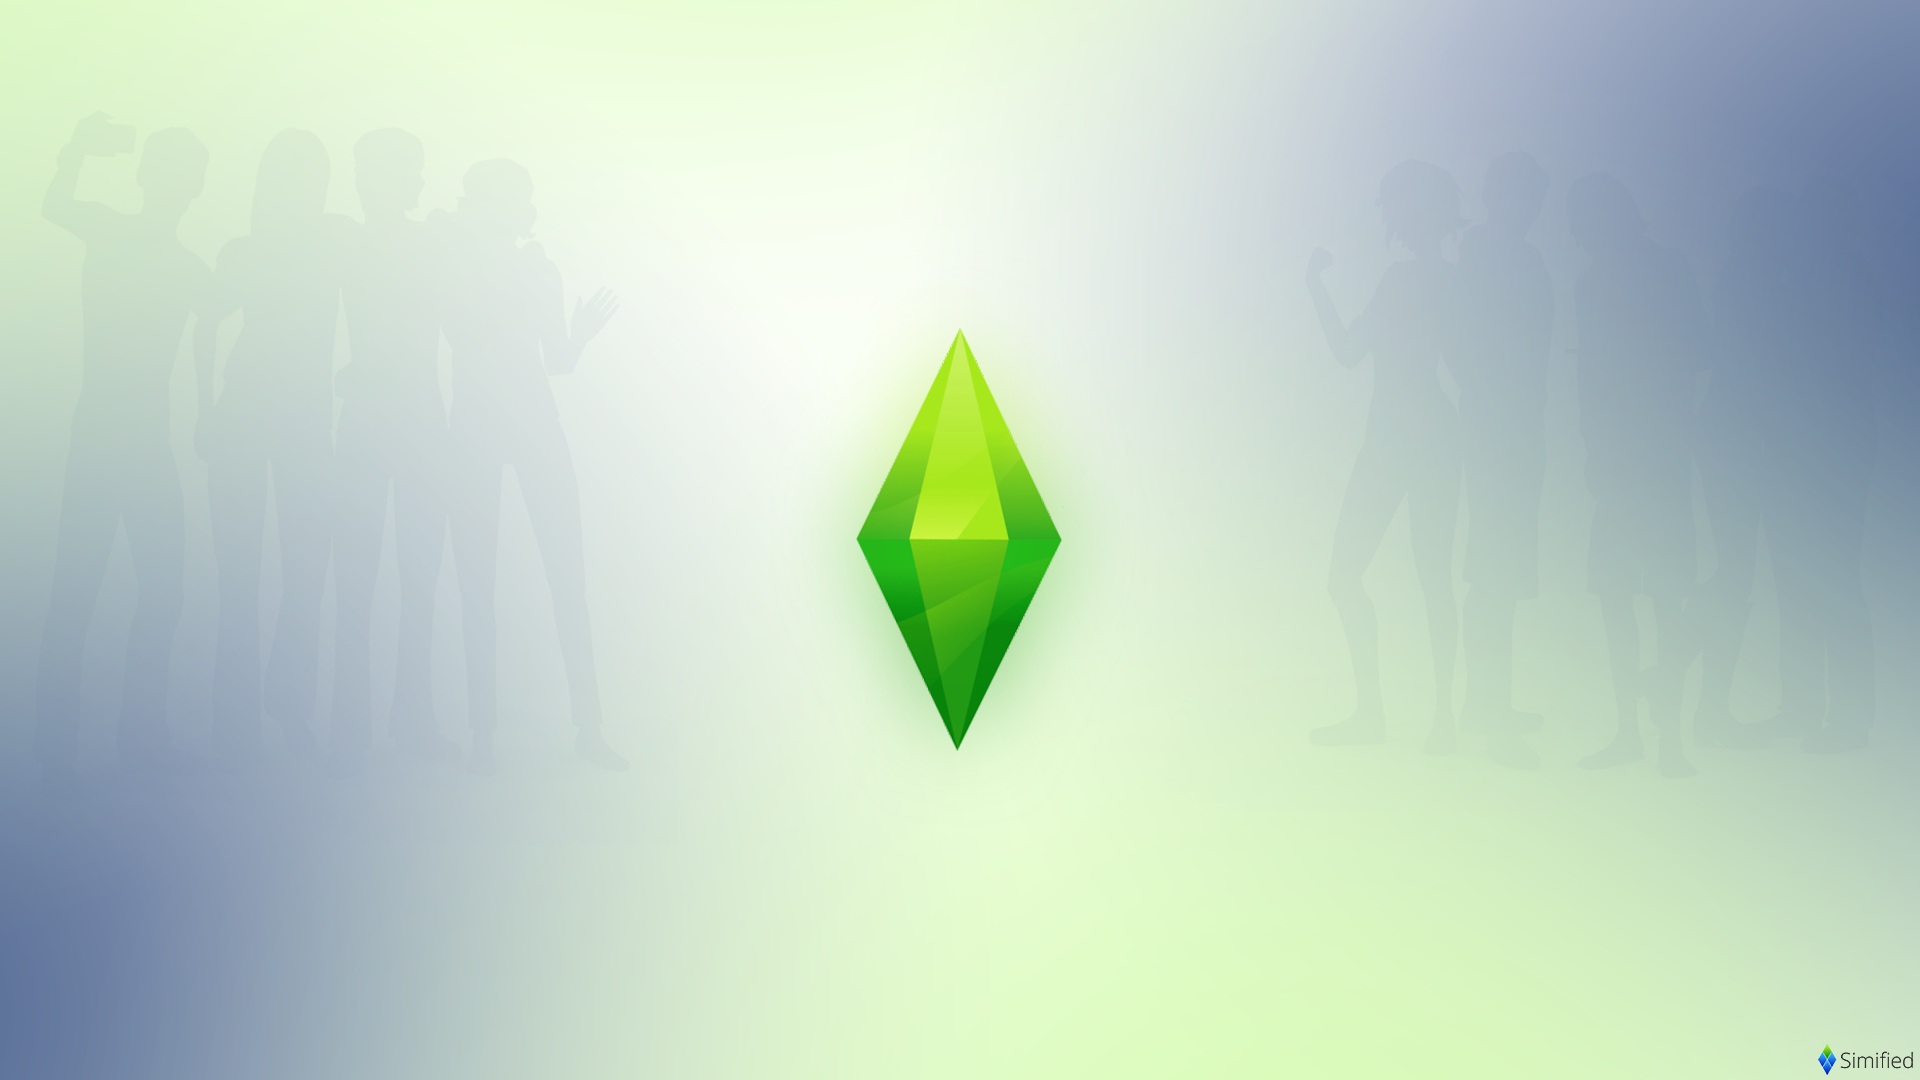 Sims 3 Wallpapers - 67 фото